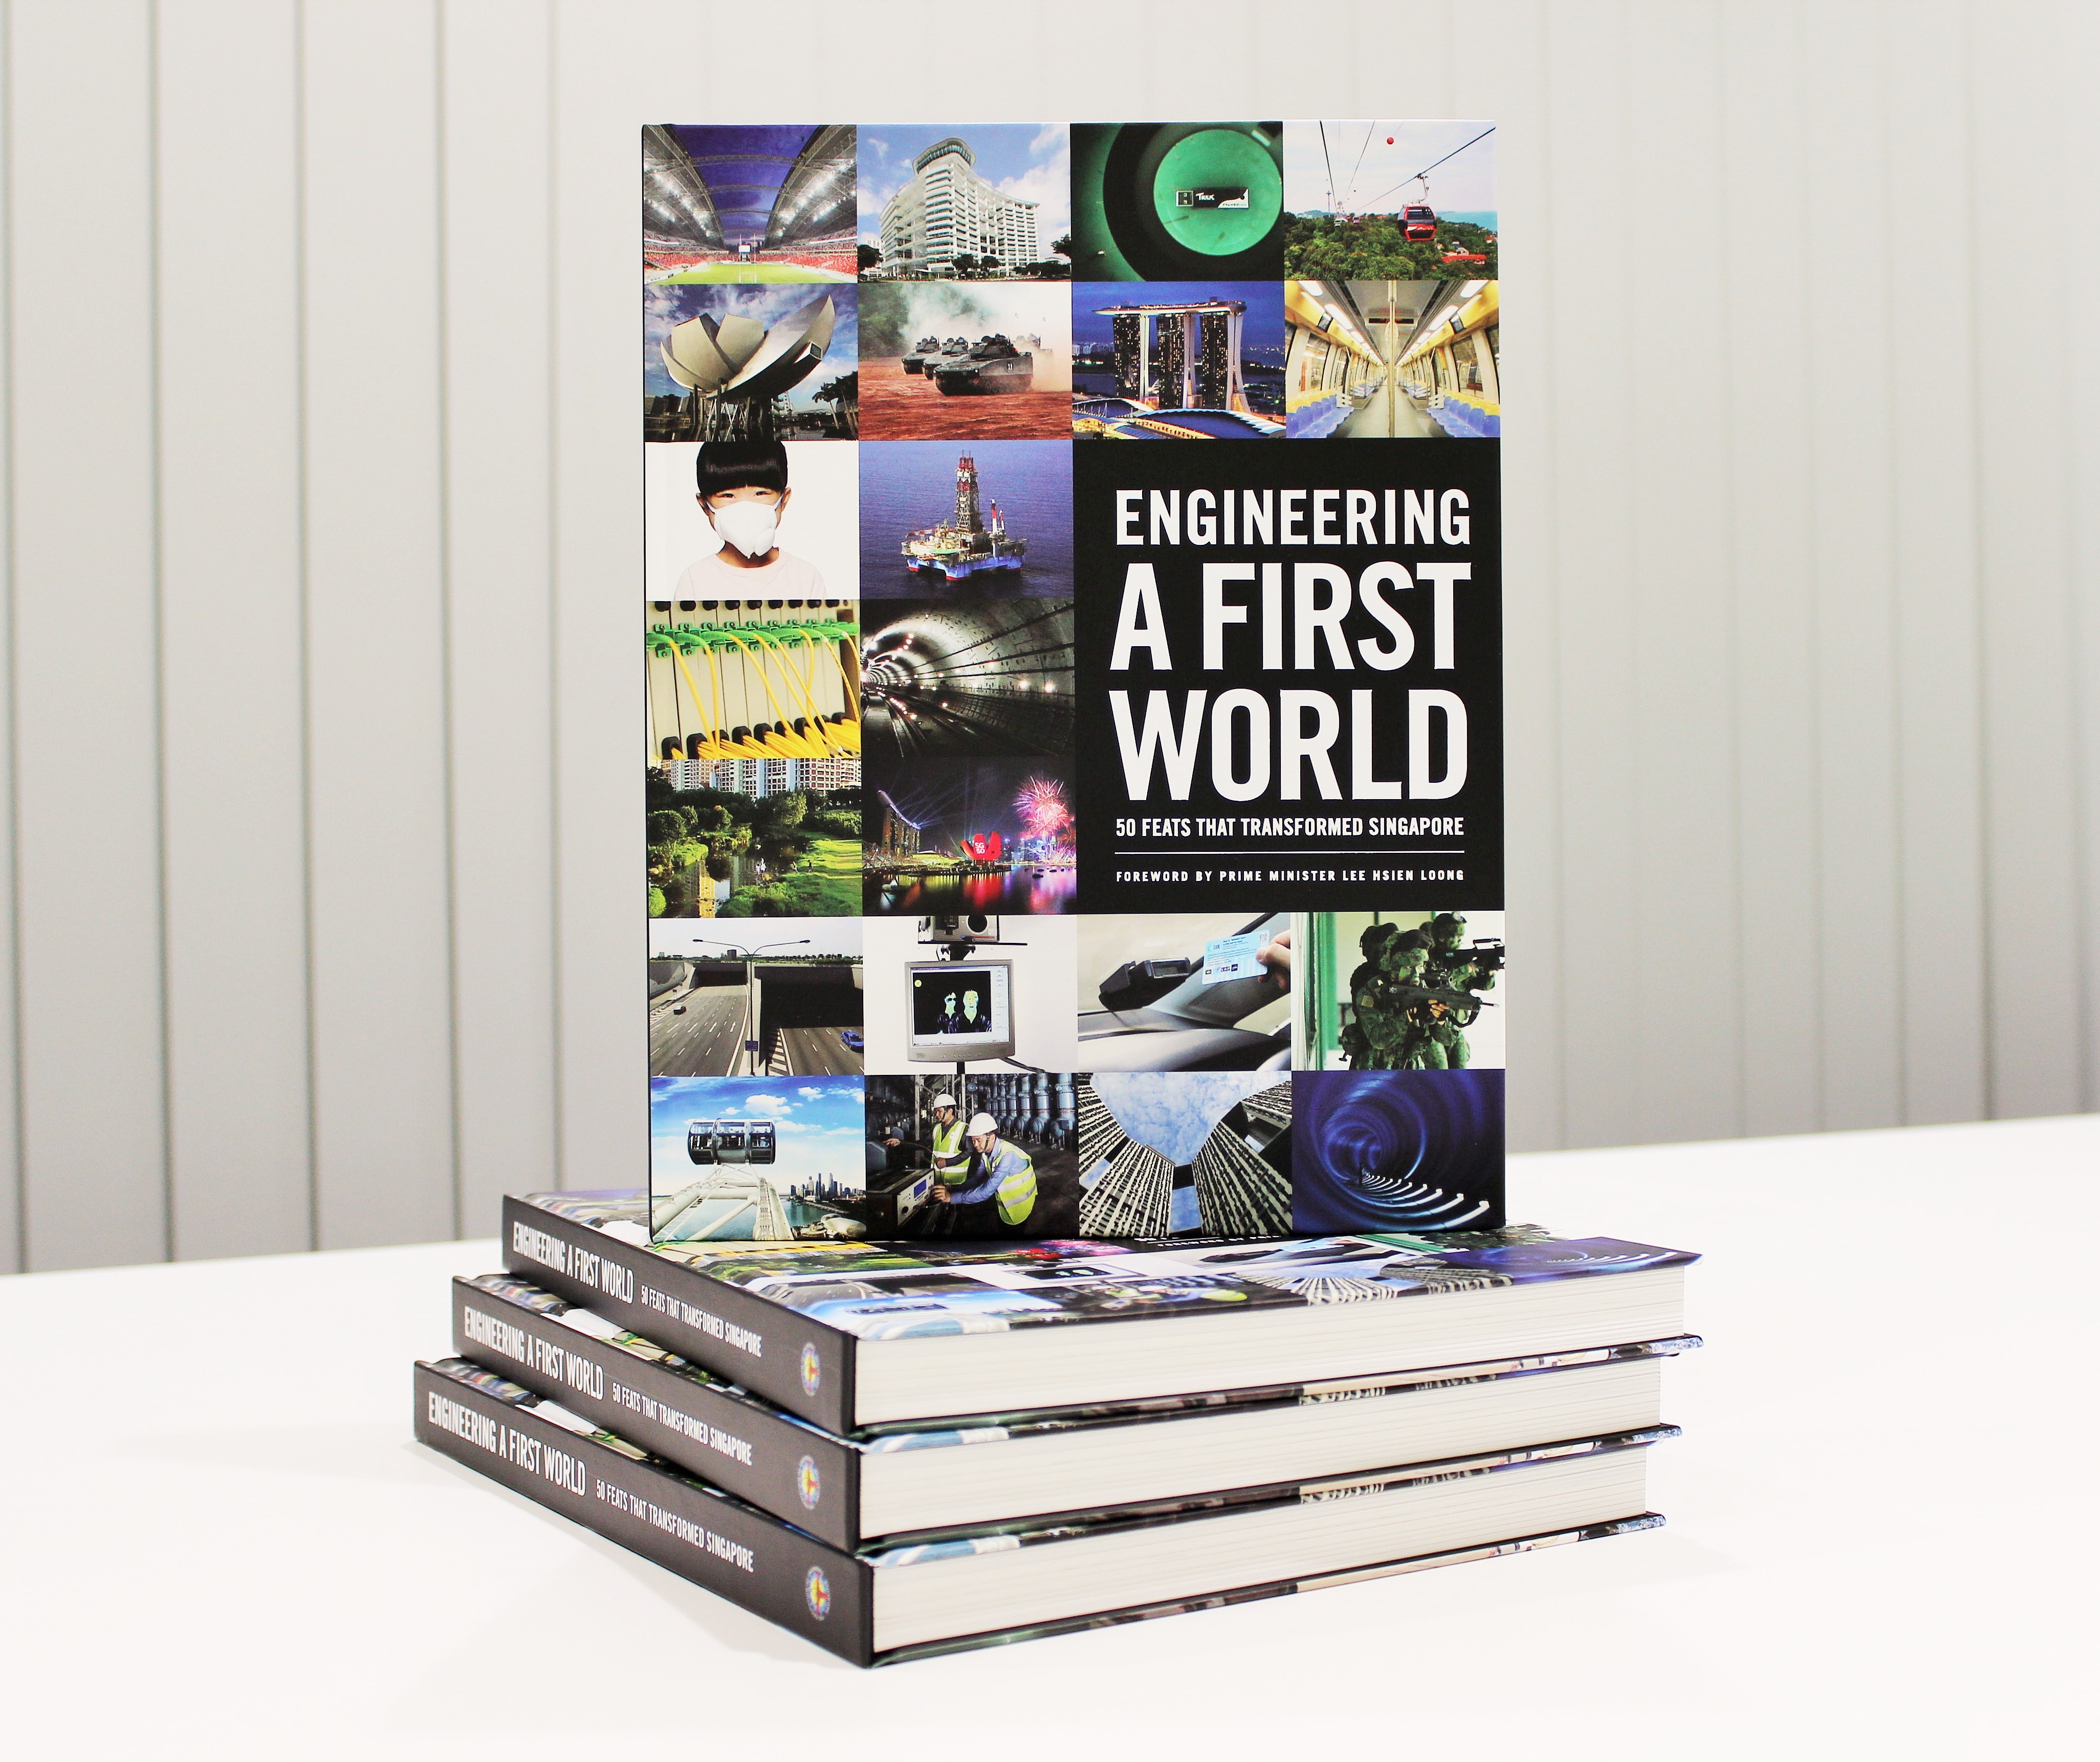 IES Engineering a First World Book (1 of 3)